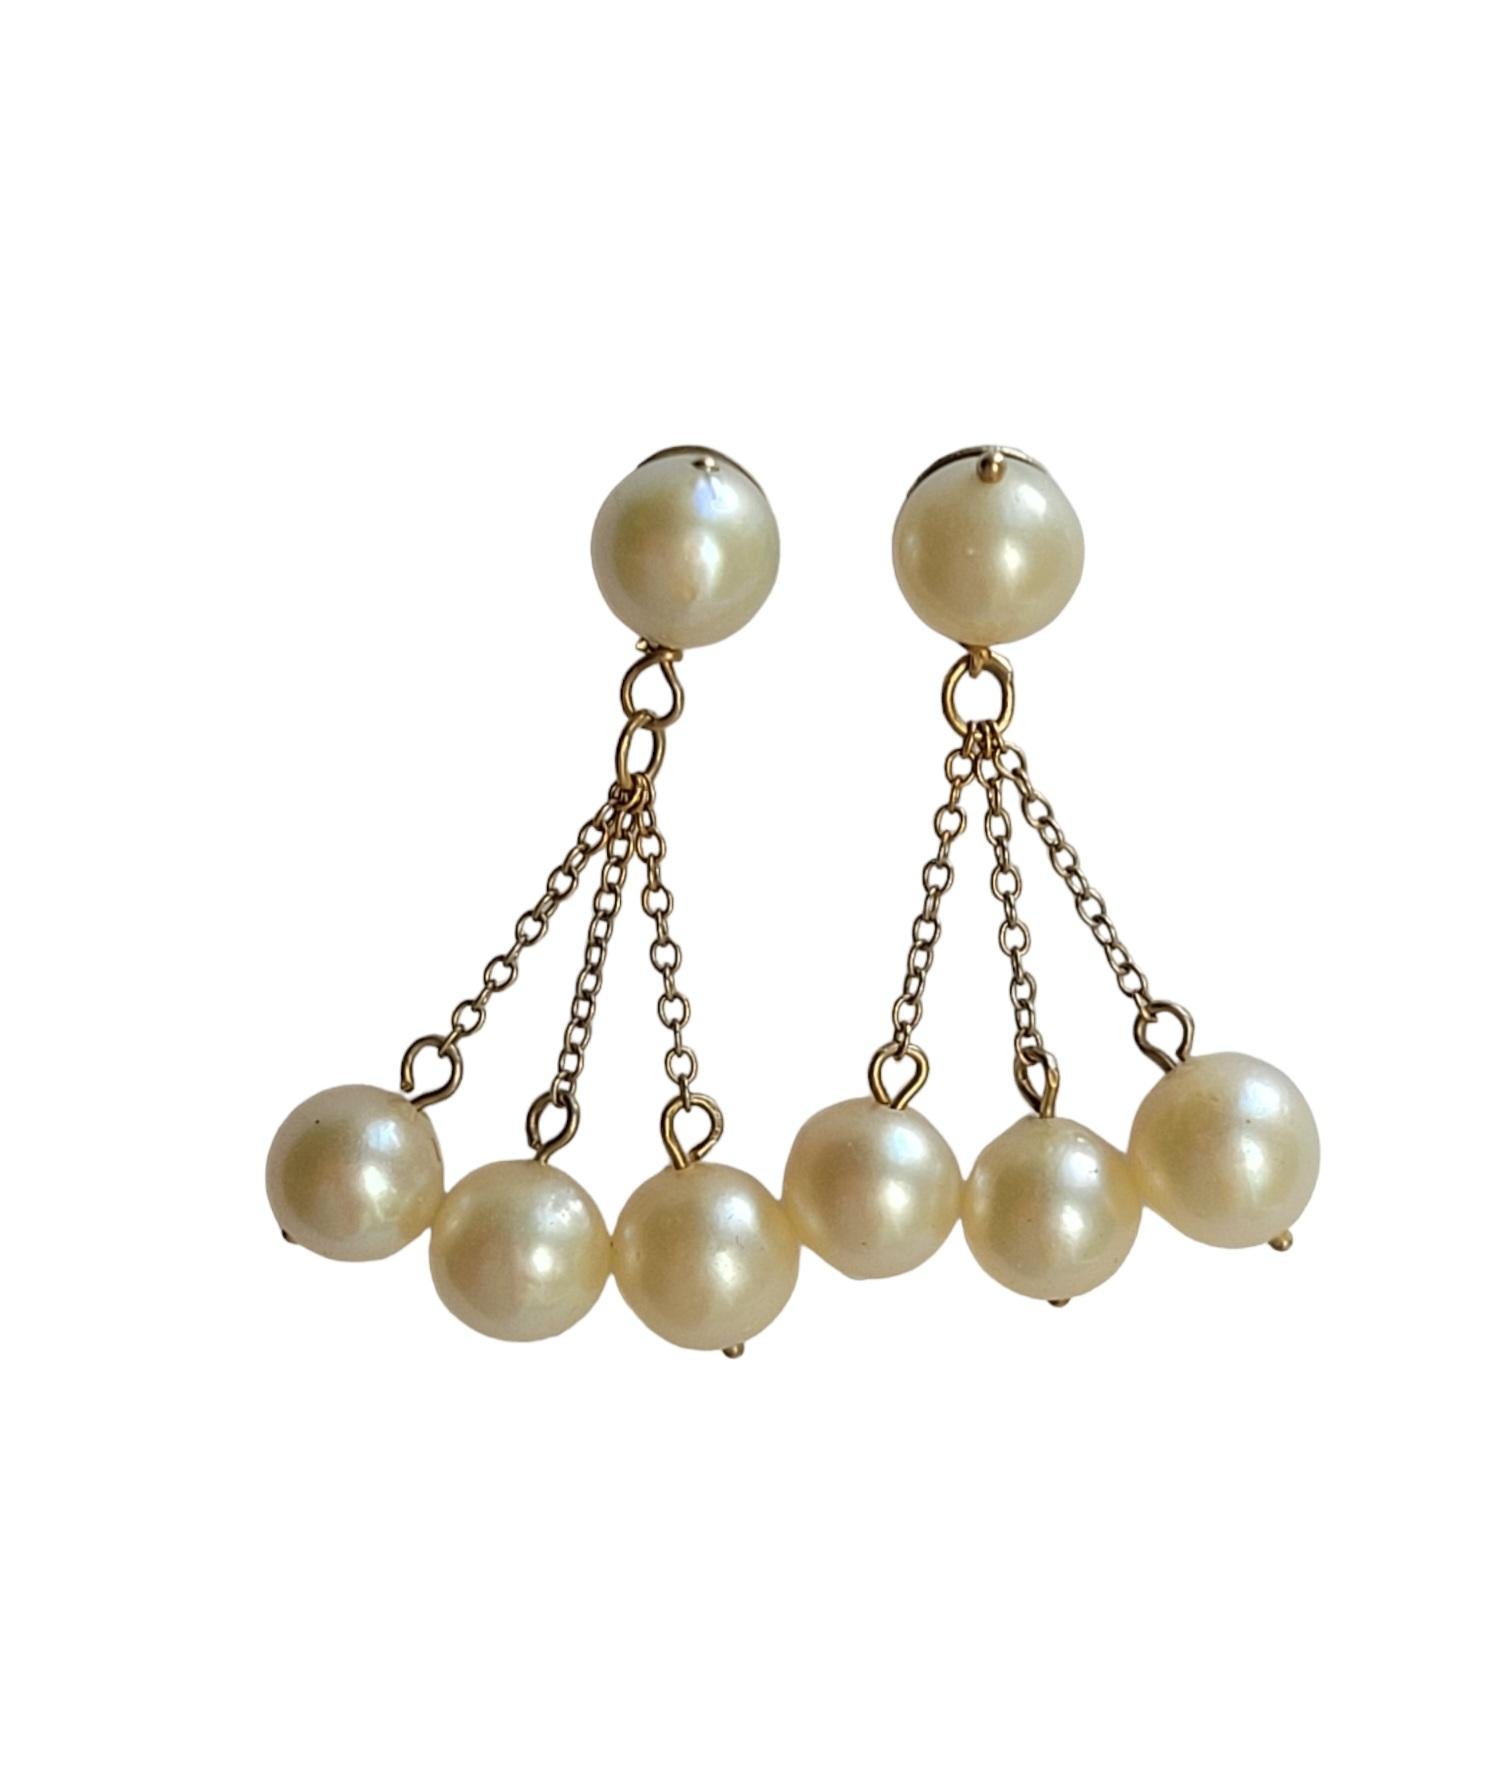 A PAIR OF LOVELY VINTAGE 9 CARAT YELLOW GOLD AND CULTURED PEARL DROP EARRINGS FOR PIERCED EARS.

PEARLS  7mm.
TOTAL DROP 35mm. 
BUTTERFLIES MARKED 9CT FOR 9 CARAT GOLD.
WEIGHT 5.3gr.

THE EARRINGS IN GOD CONDITION AND READY TO WEAR.